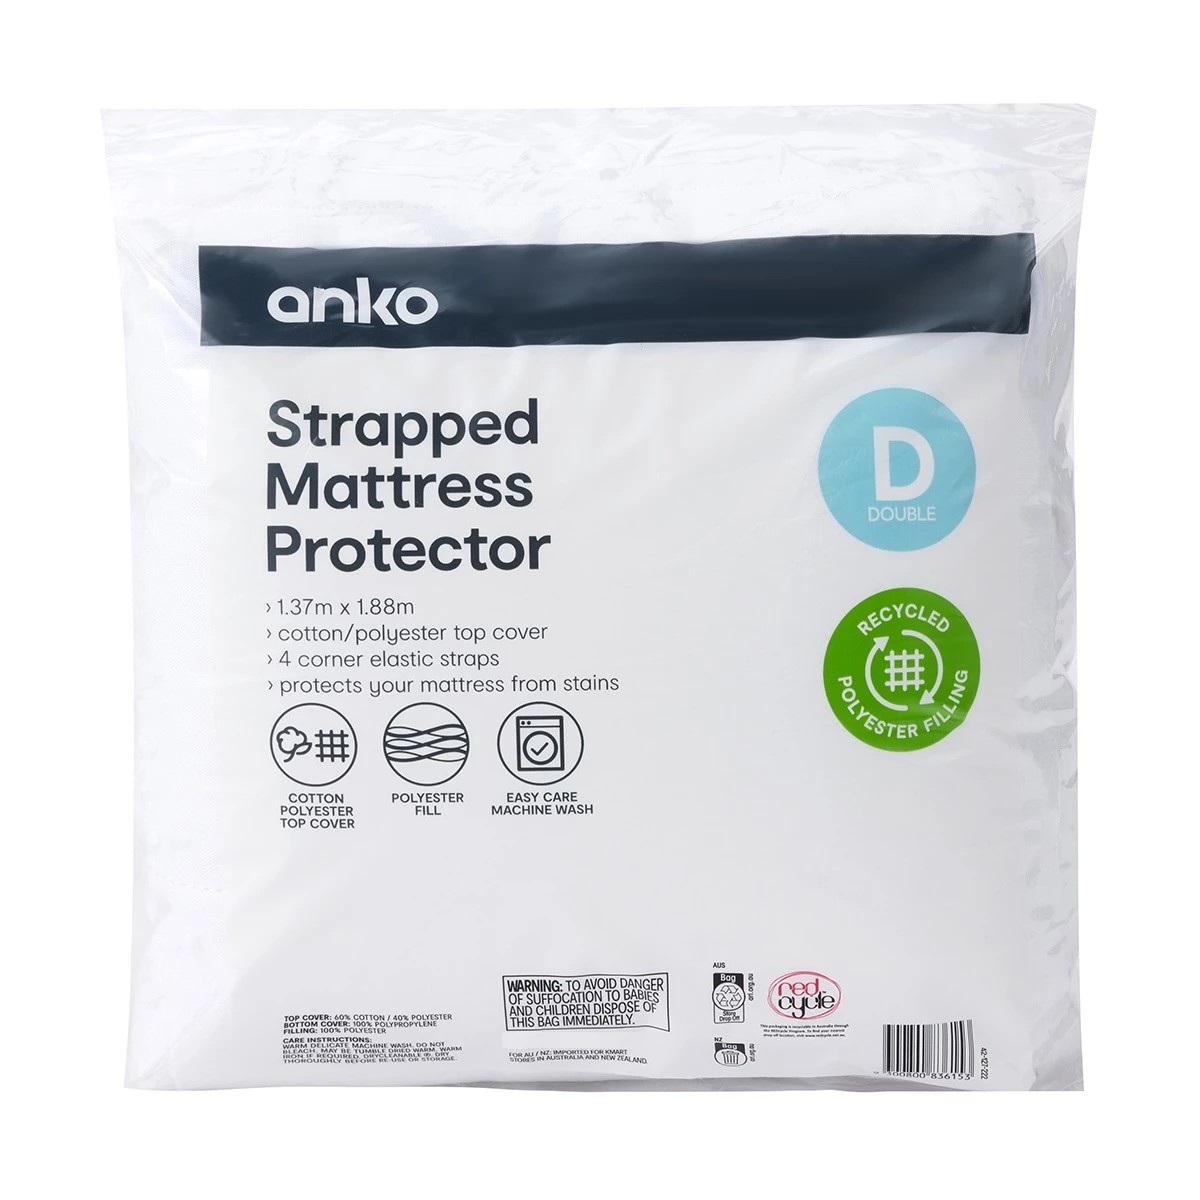 Strapped Mattress Protector, Double Bed - Anko | Target Australia